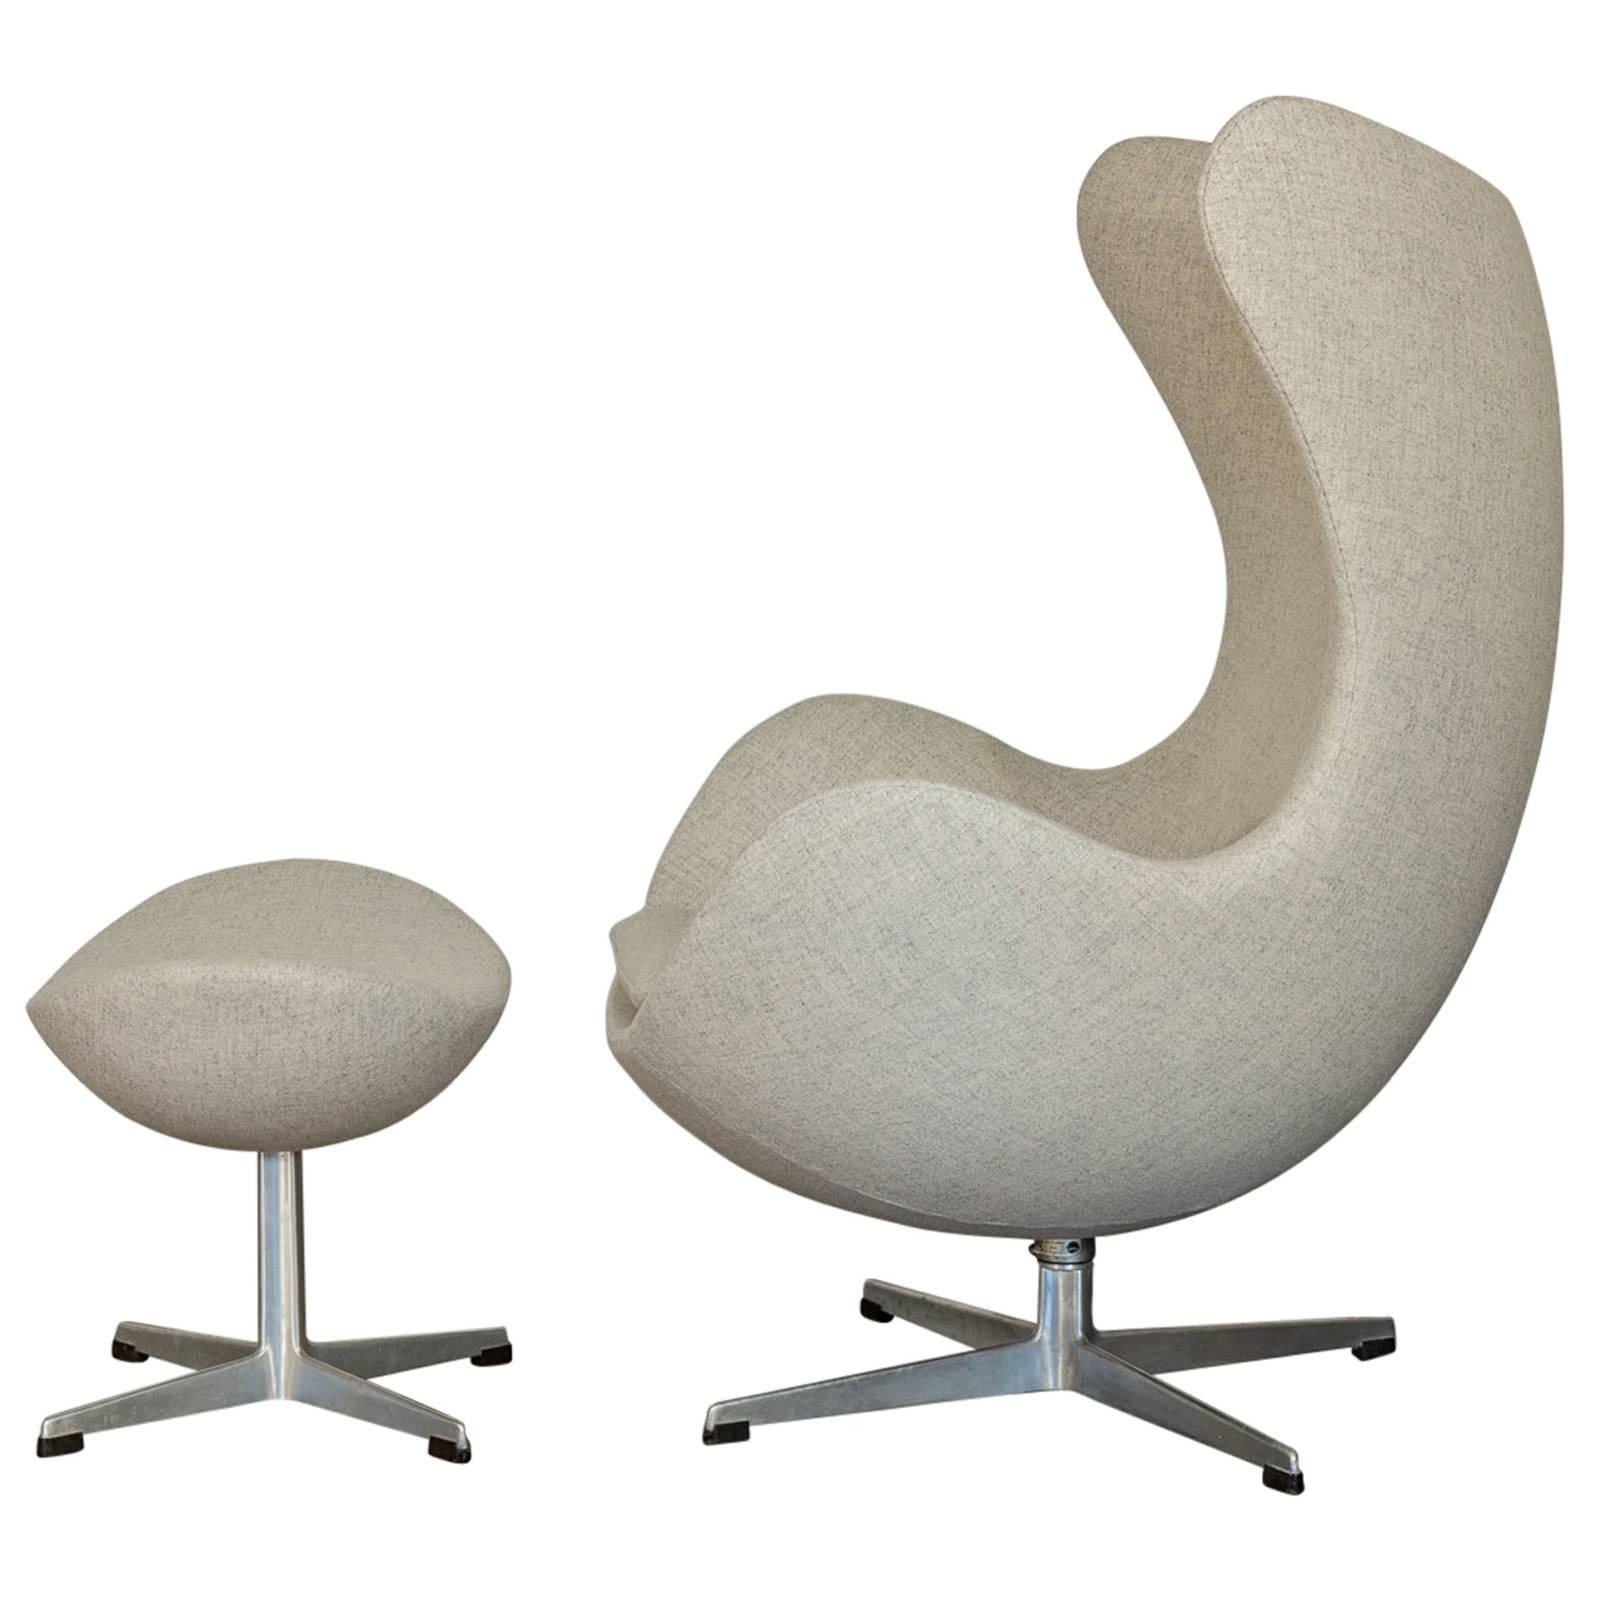 The iconic Egg chair and matching footstool designed by Arne Jacobsen in 1958. Our chair dates to the 1960s and has been meticulously upholstered in pale gray Tonica wool. Superbly comfortable. Swiveling four-star base. Made by Fritz Hansen and